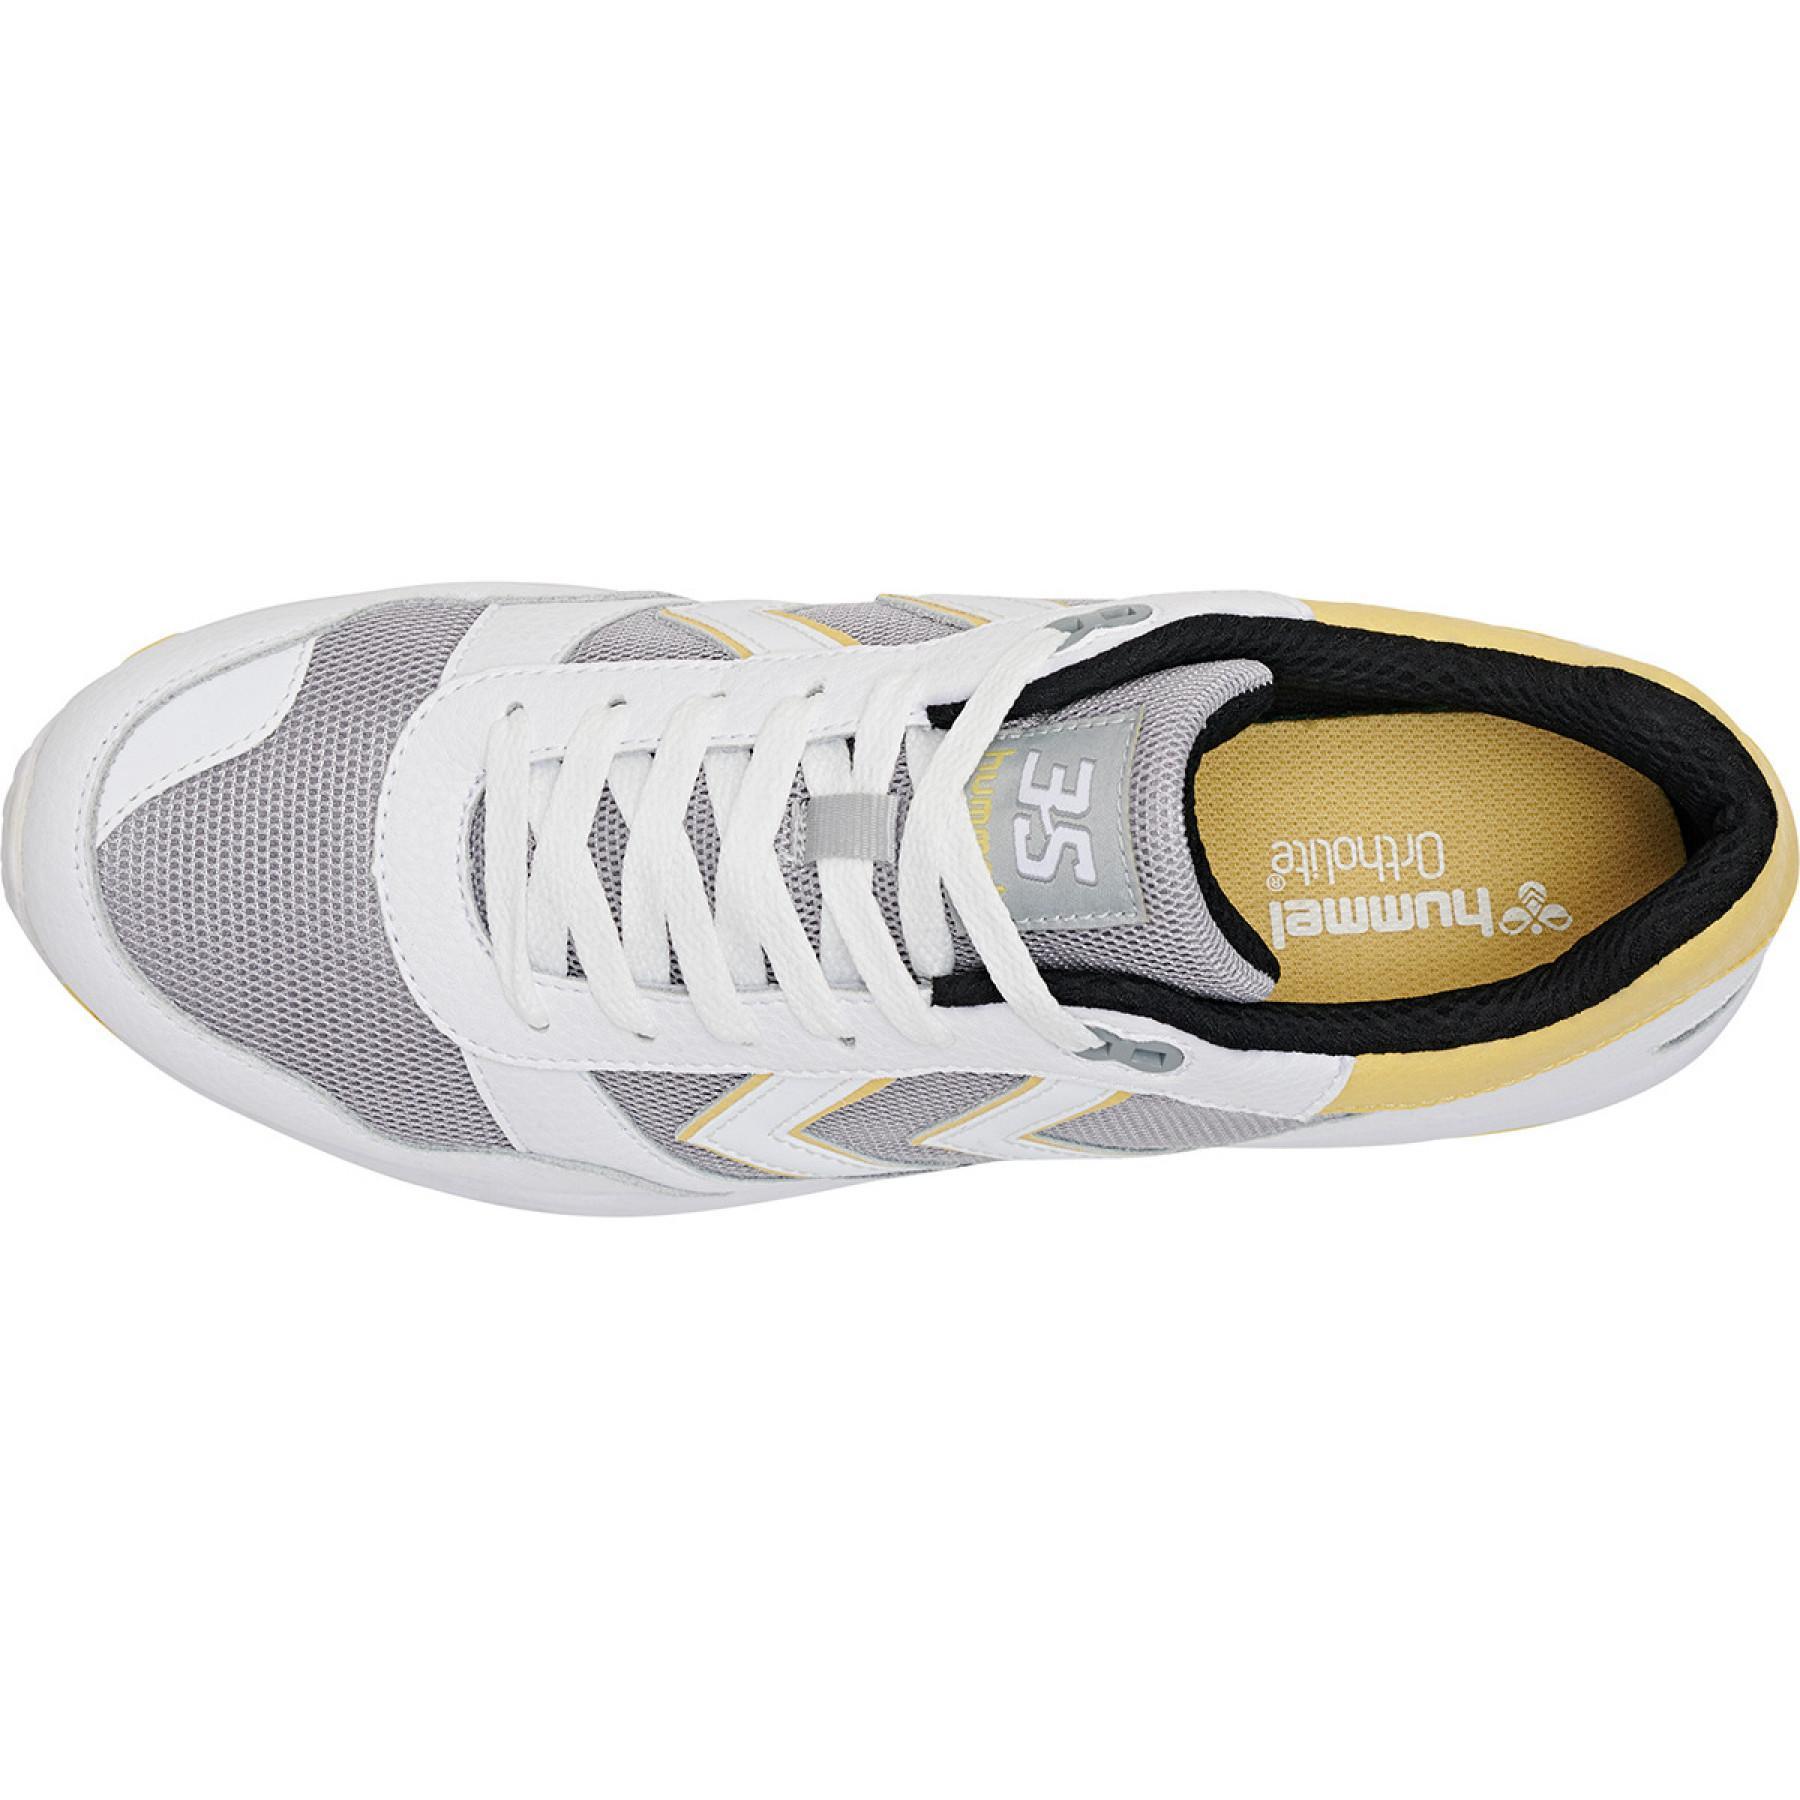 Formadores Hummel 3s sport leather